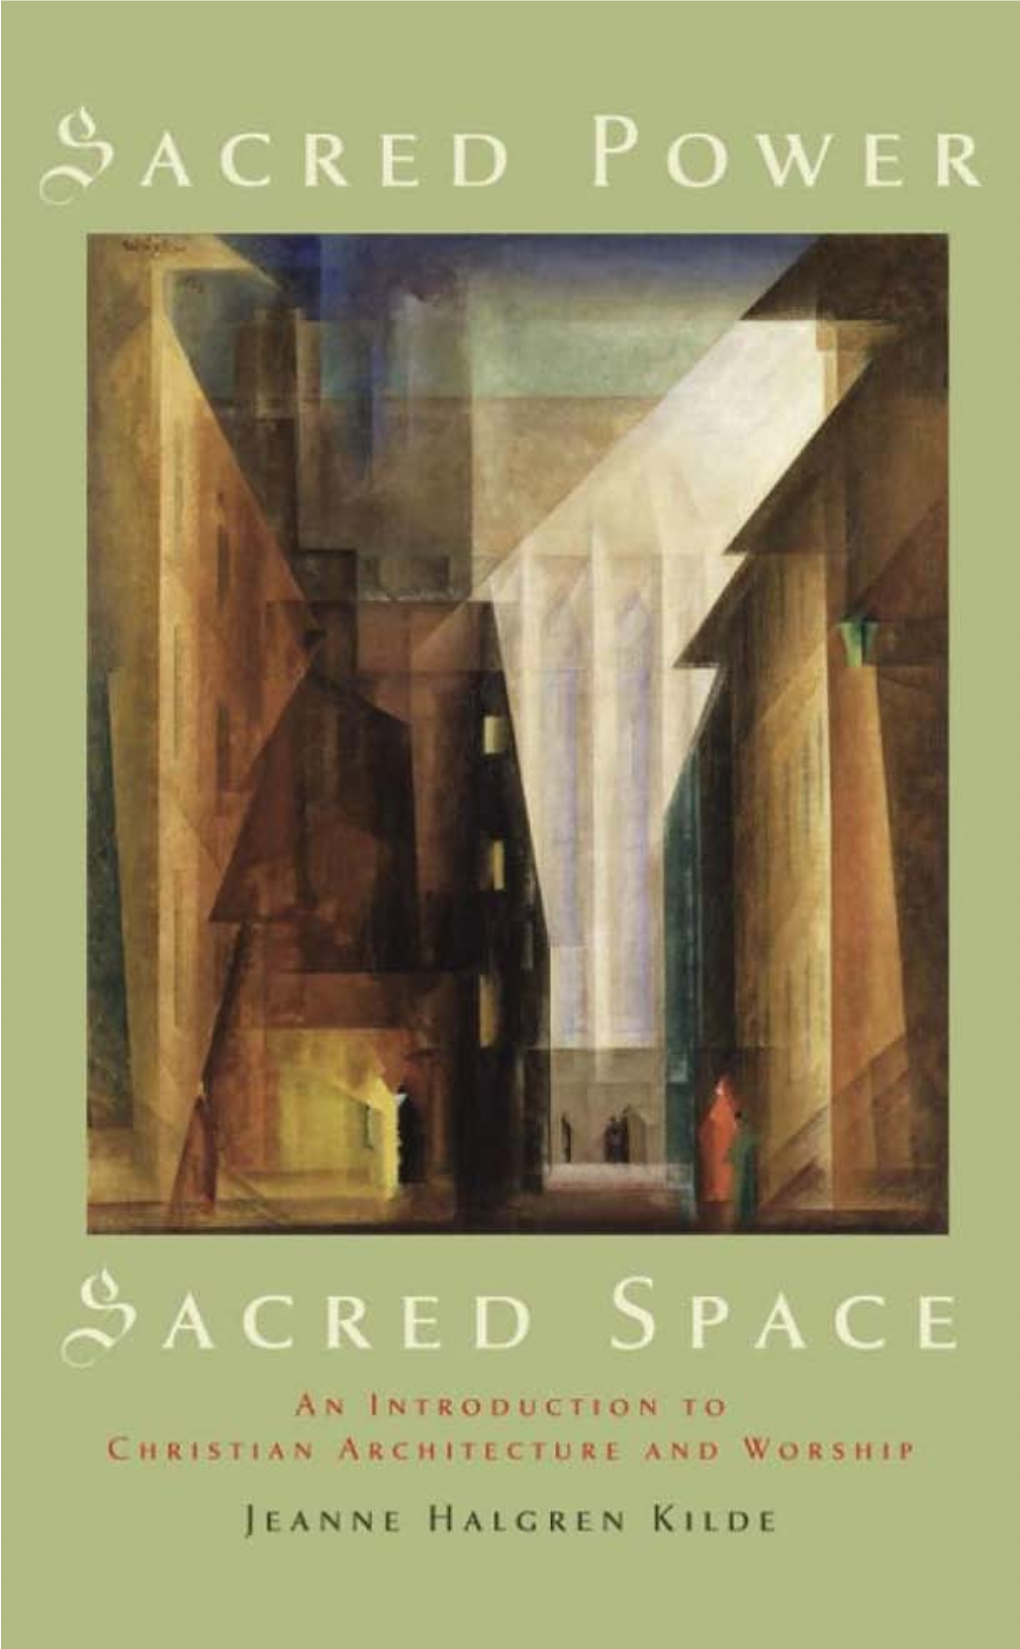 Sacred Power, Sacred Space: an Introduction to Christian Architecture